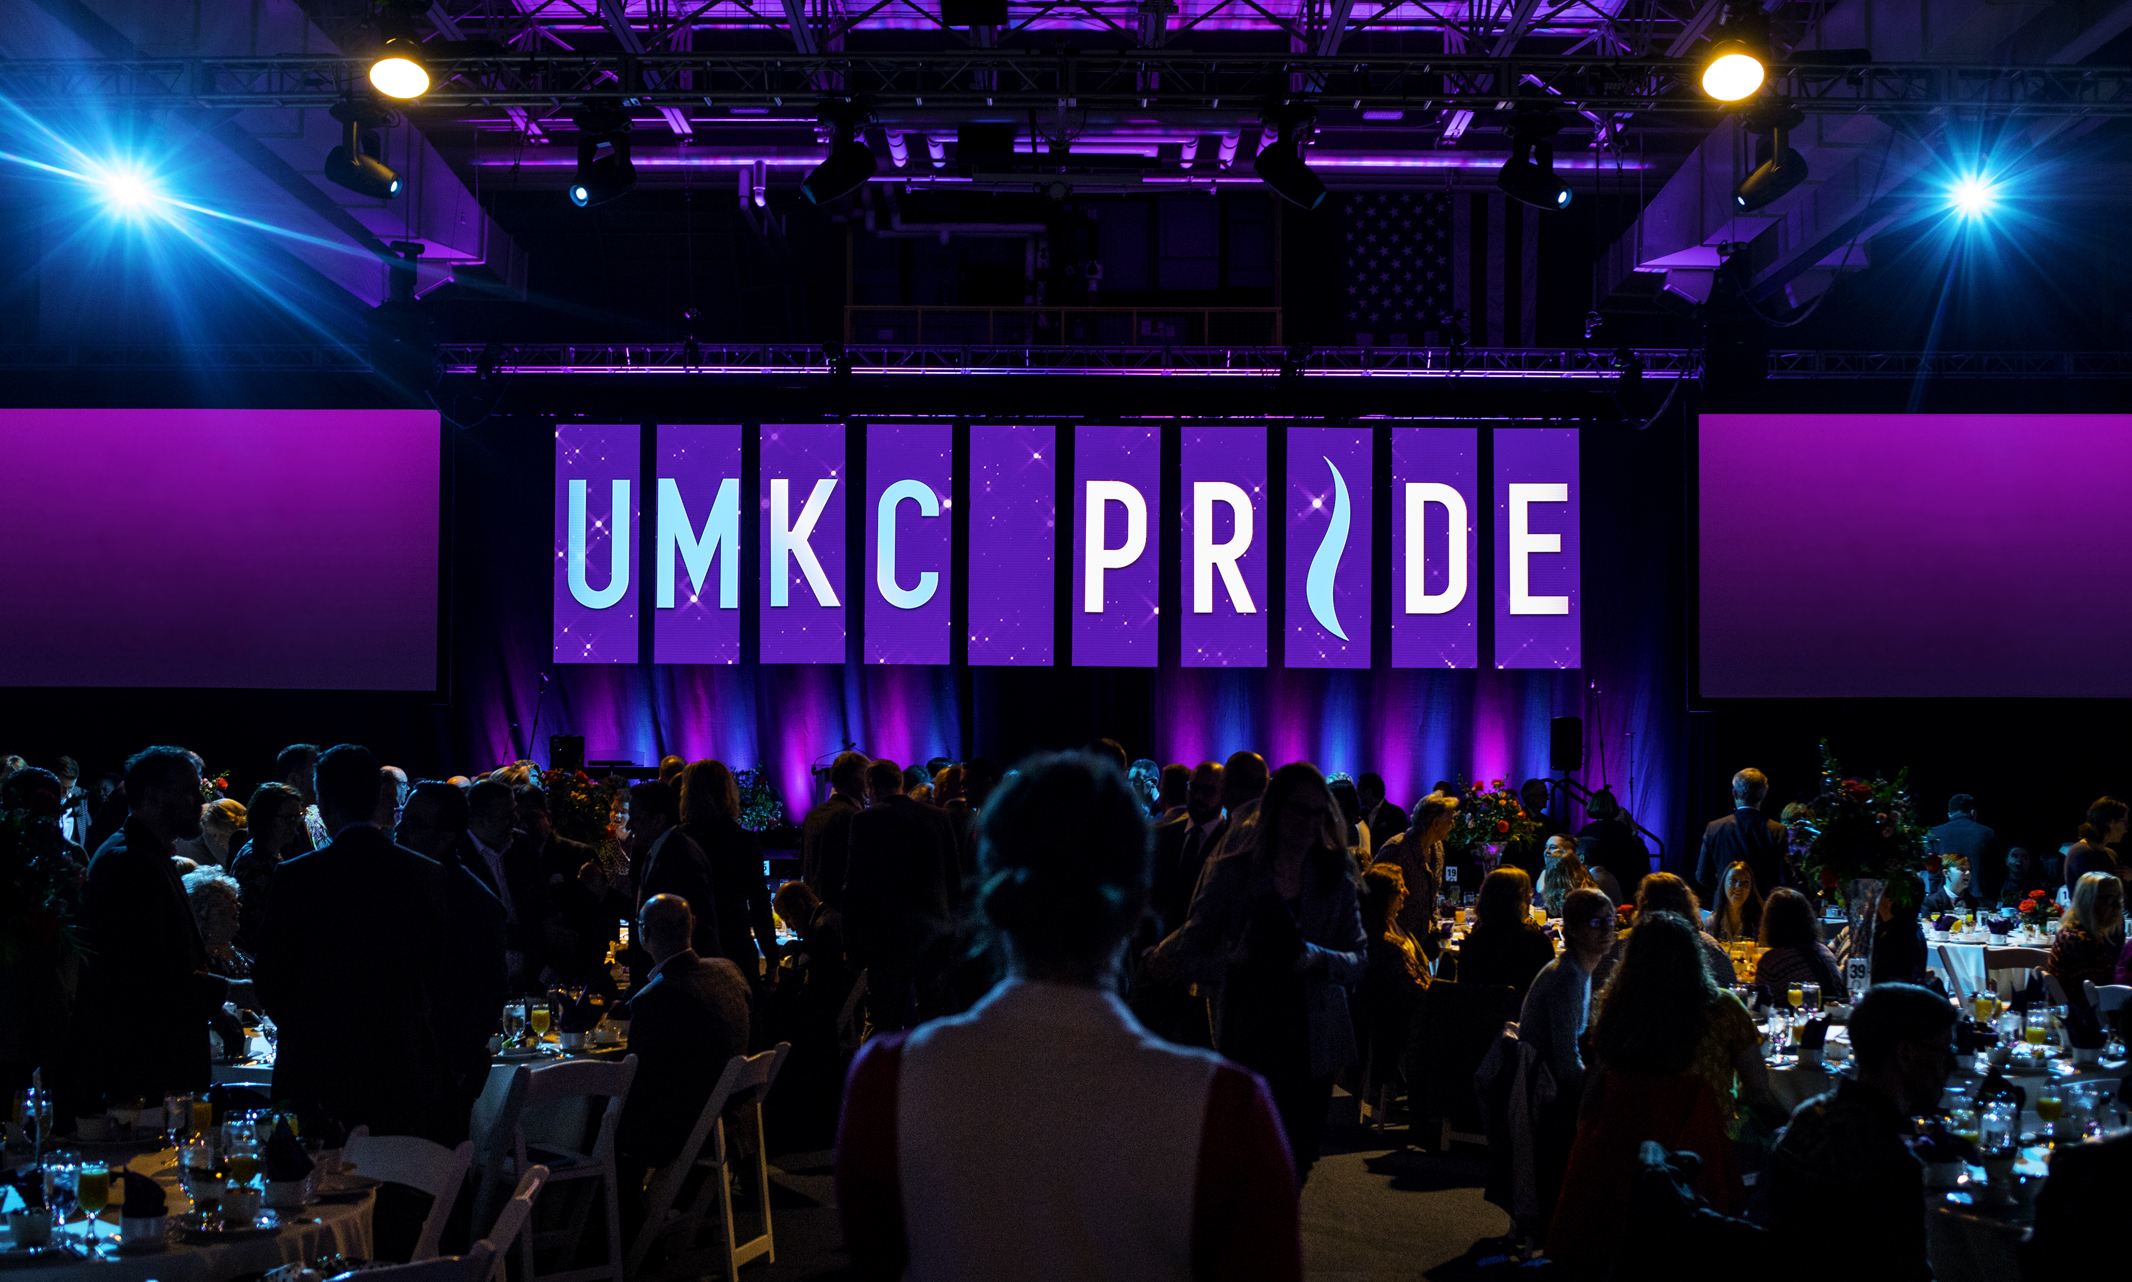 Looking at the UMKC Pride stage lit up with purple and blue lights